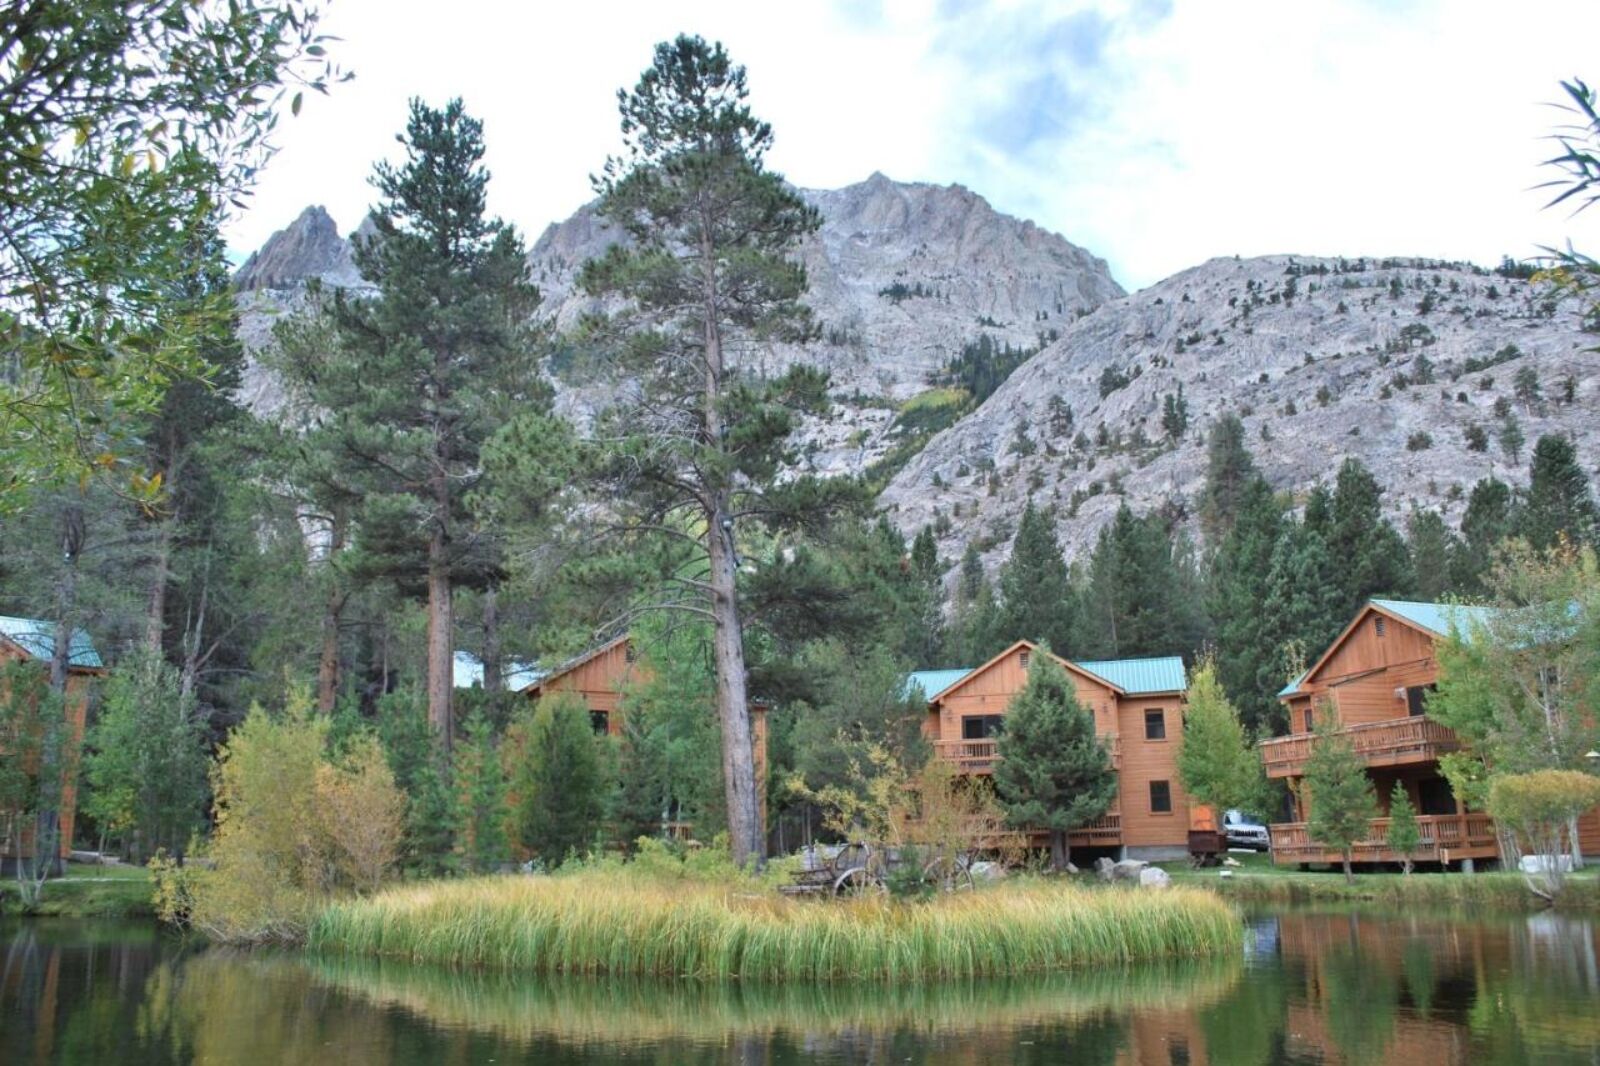 Double Eagle Resort and Spa  one of the best Yosemite hotels